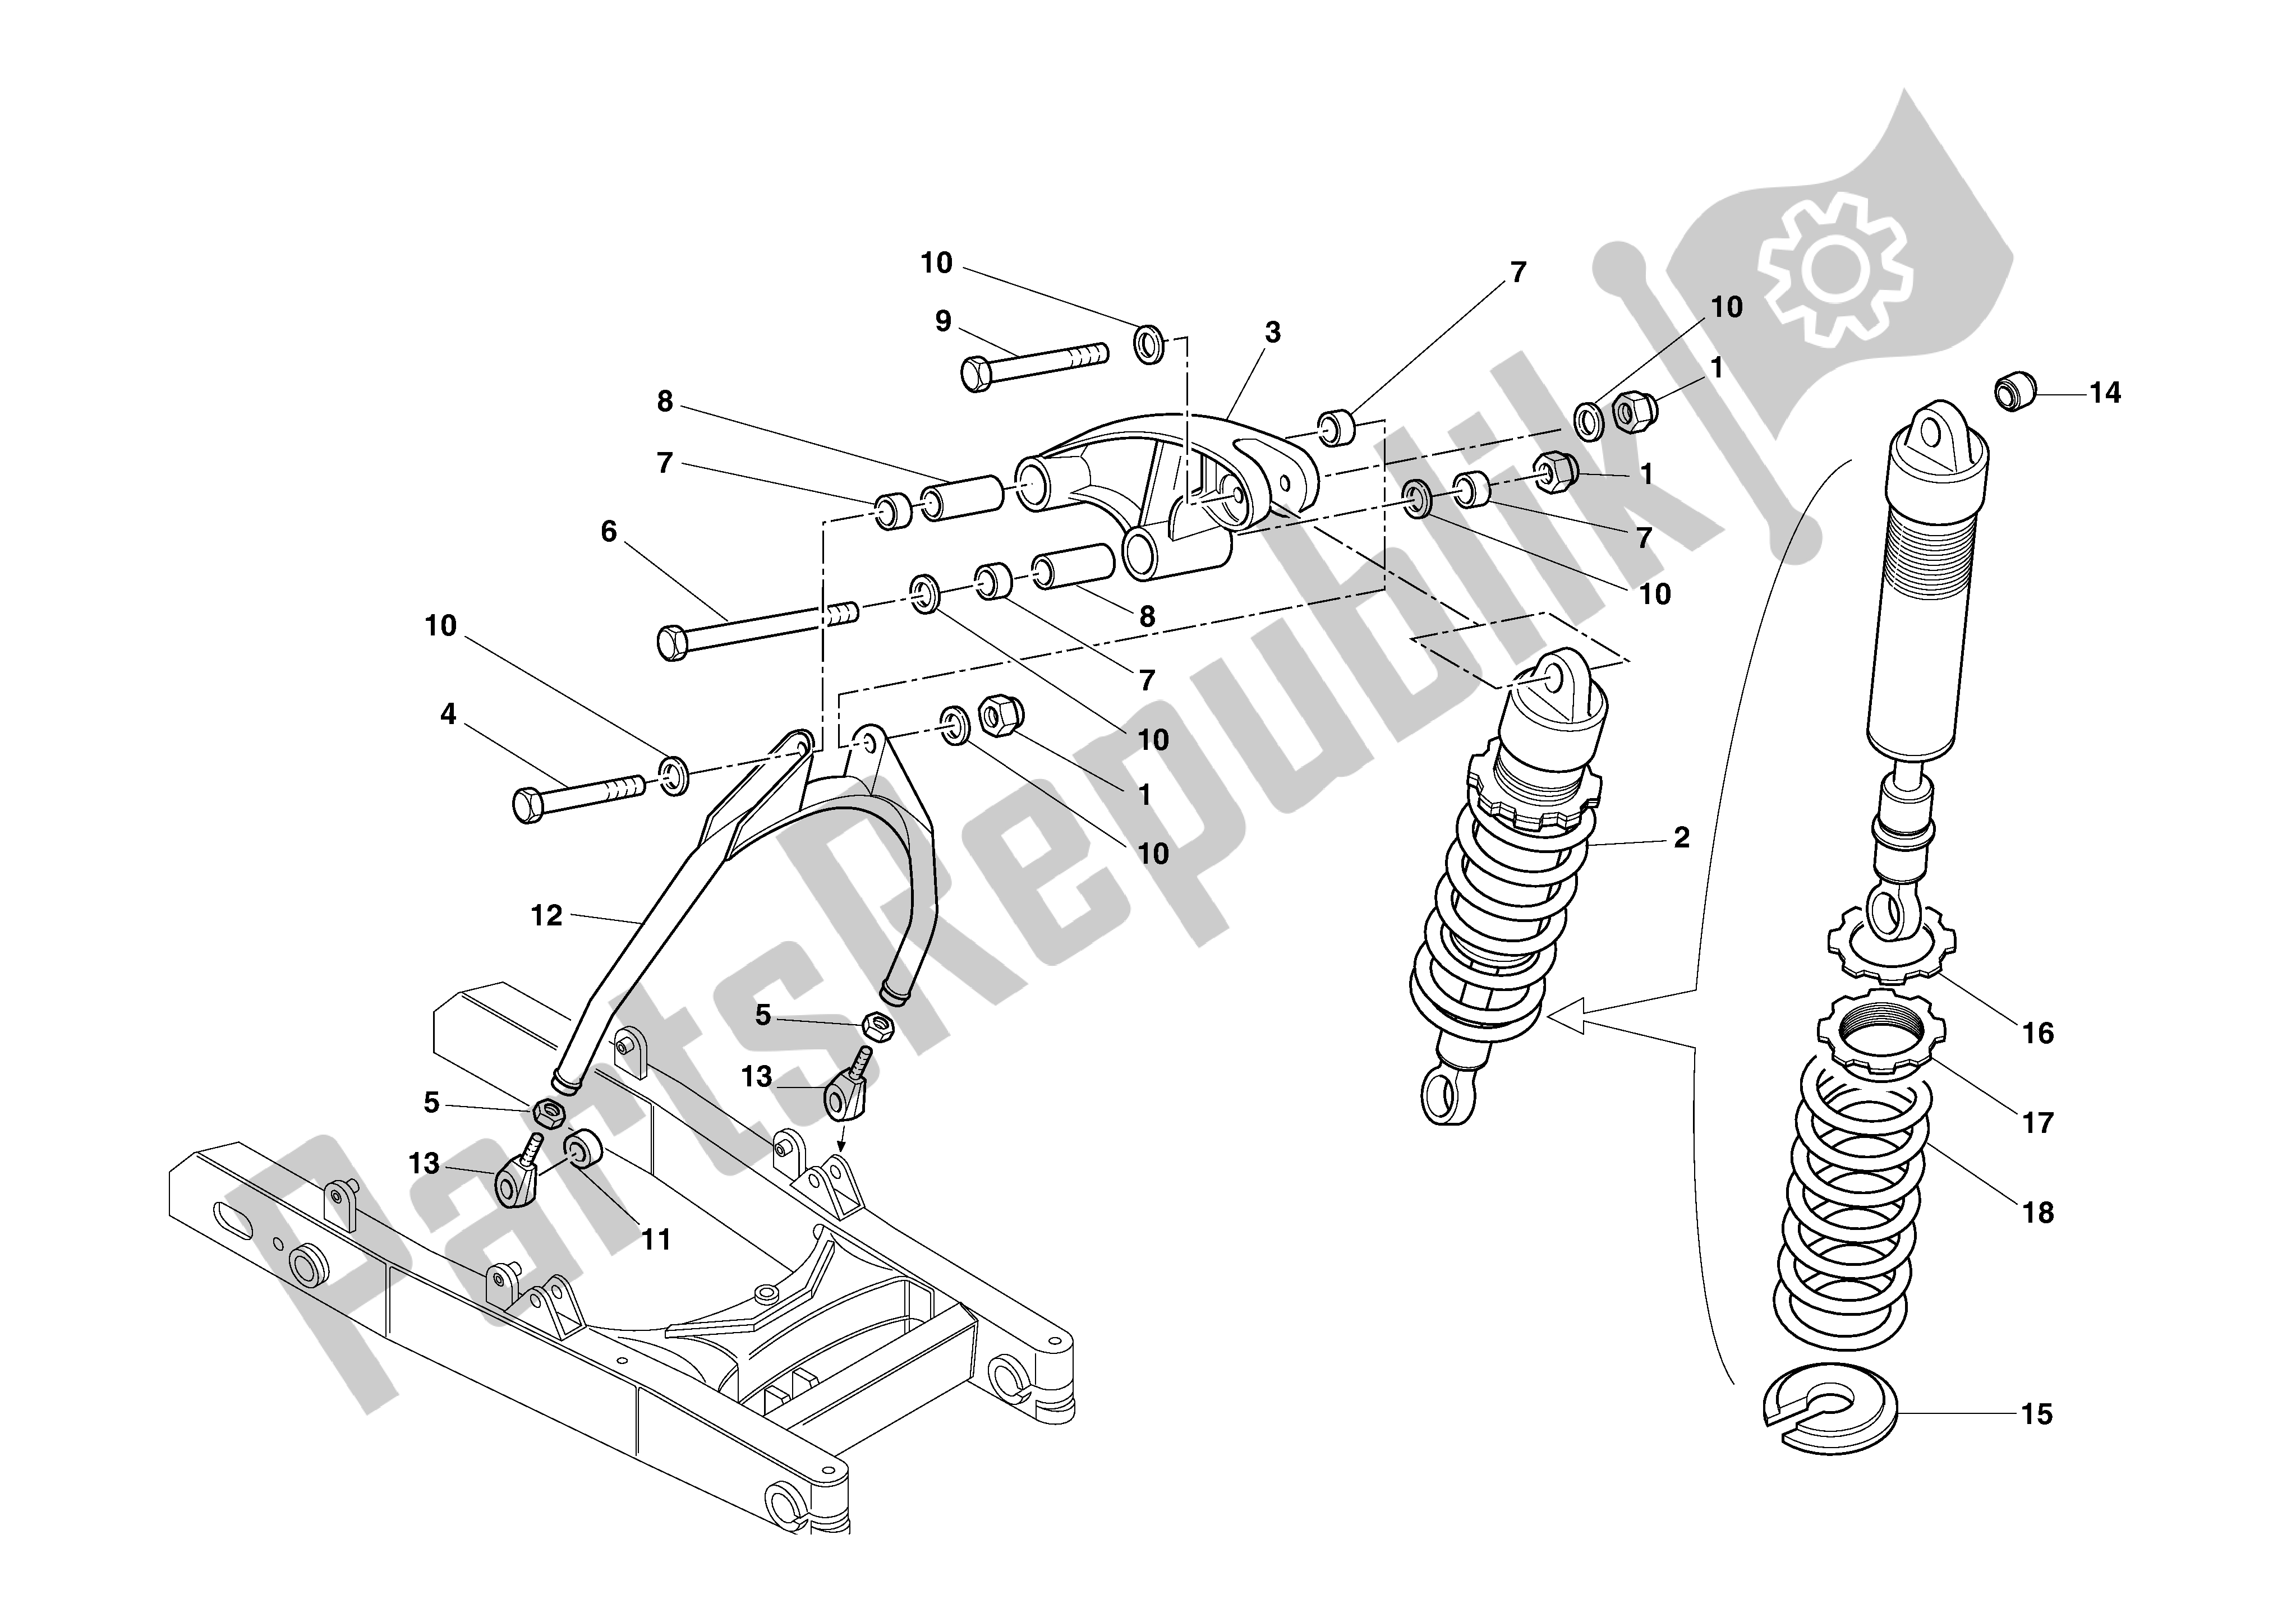 All parts for the Rear Suspension of the Ducati Monster 750 1996 - 2001